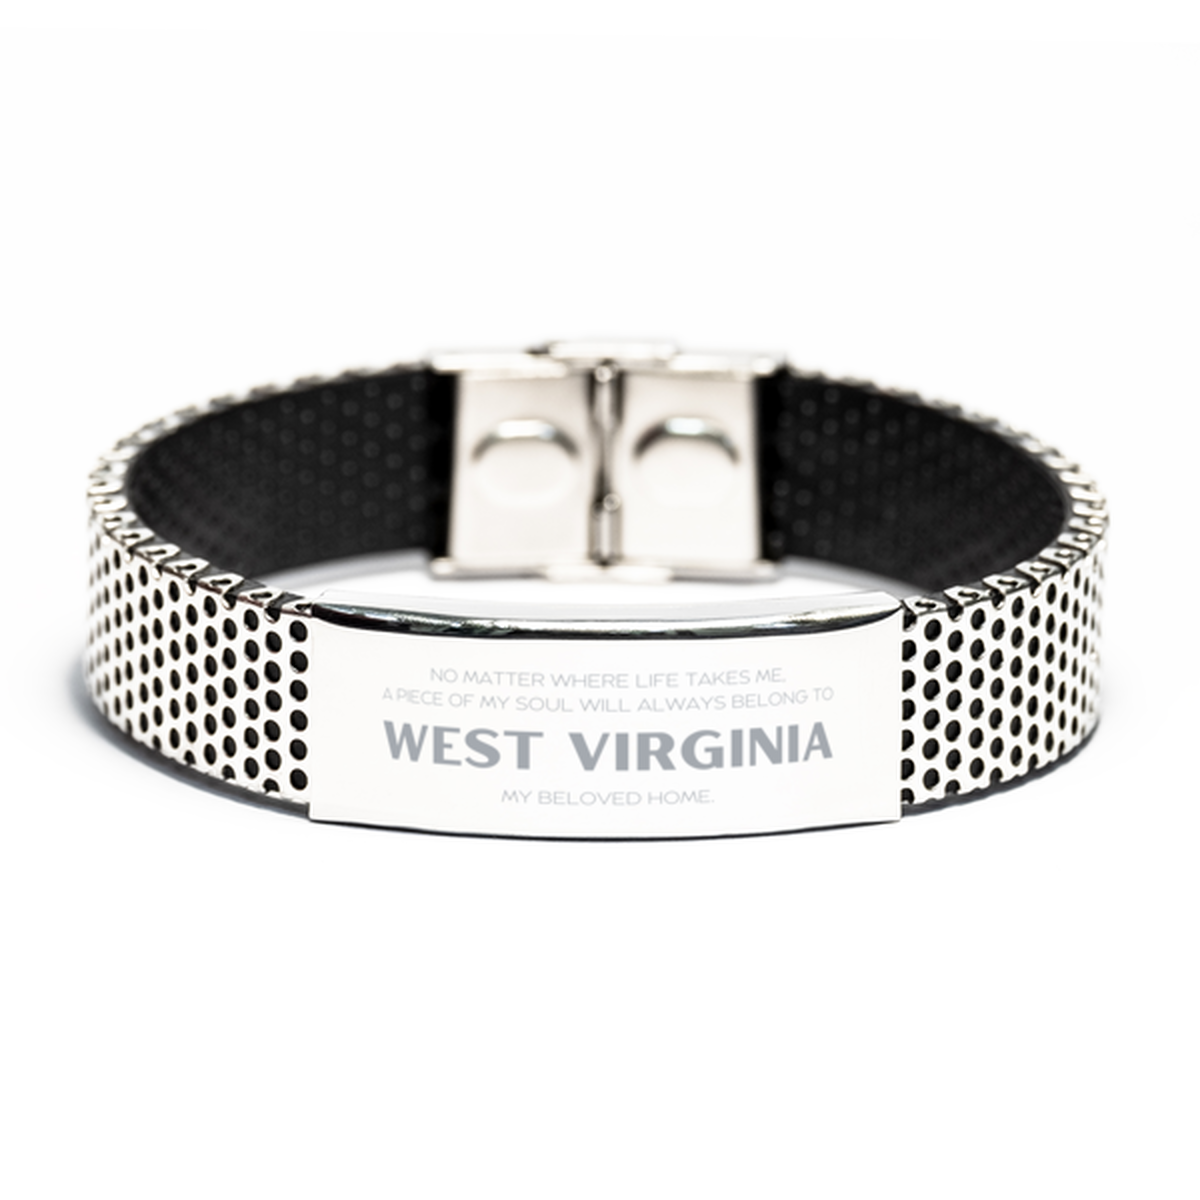 Love West Virginia State Gifts, My soul will always belong to West Virginia, Proud Stainless Steel Bracelet, Birthday Unique Gifts For West Virginia Men, Women, Friends